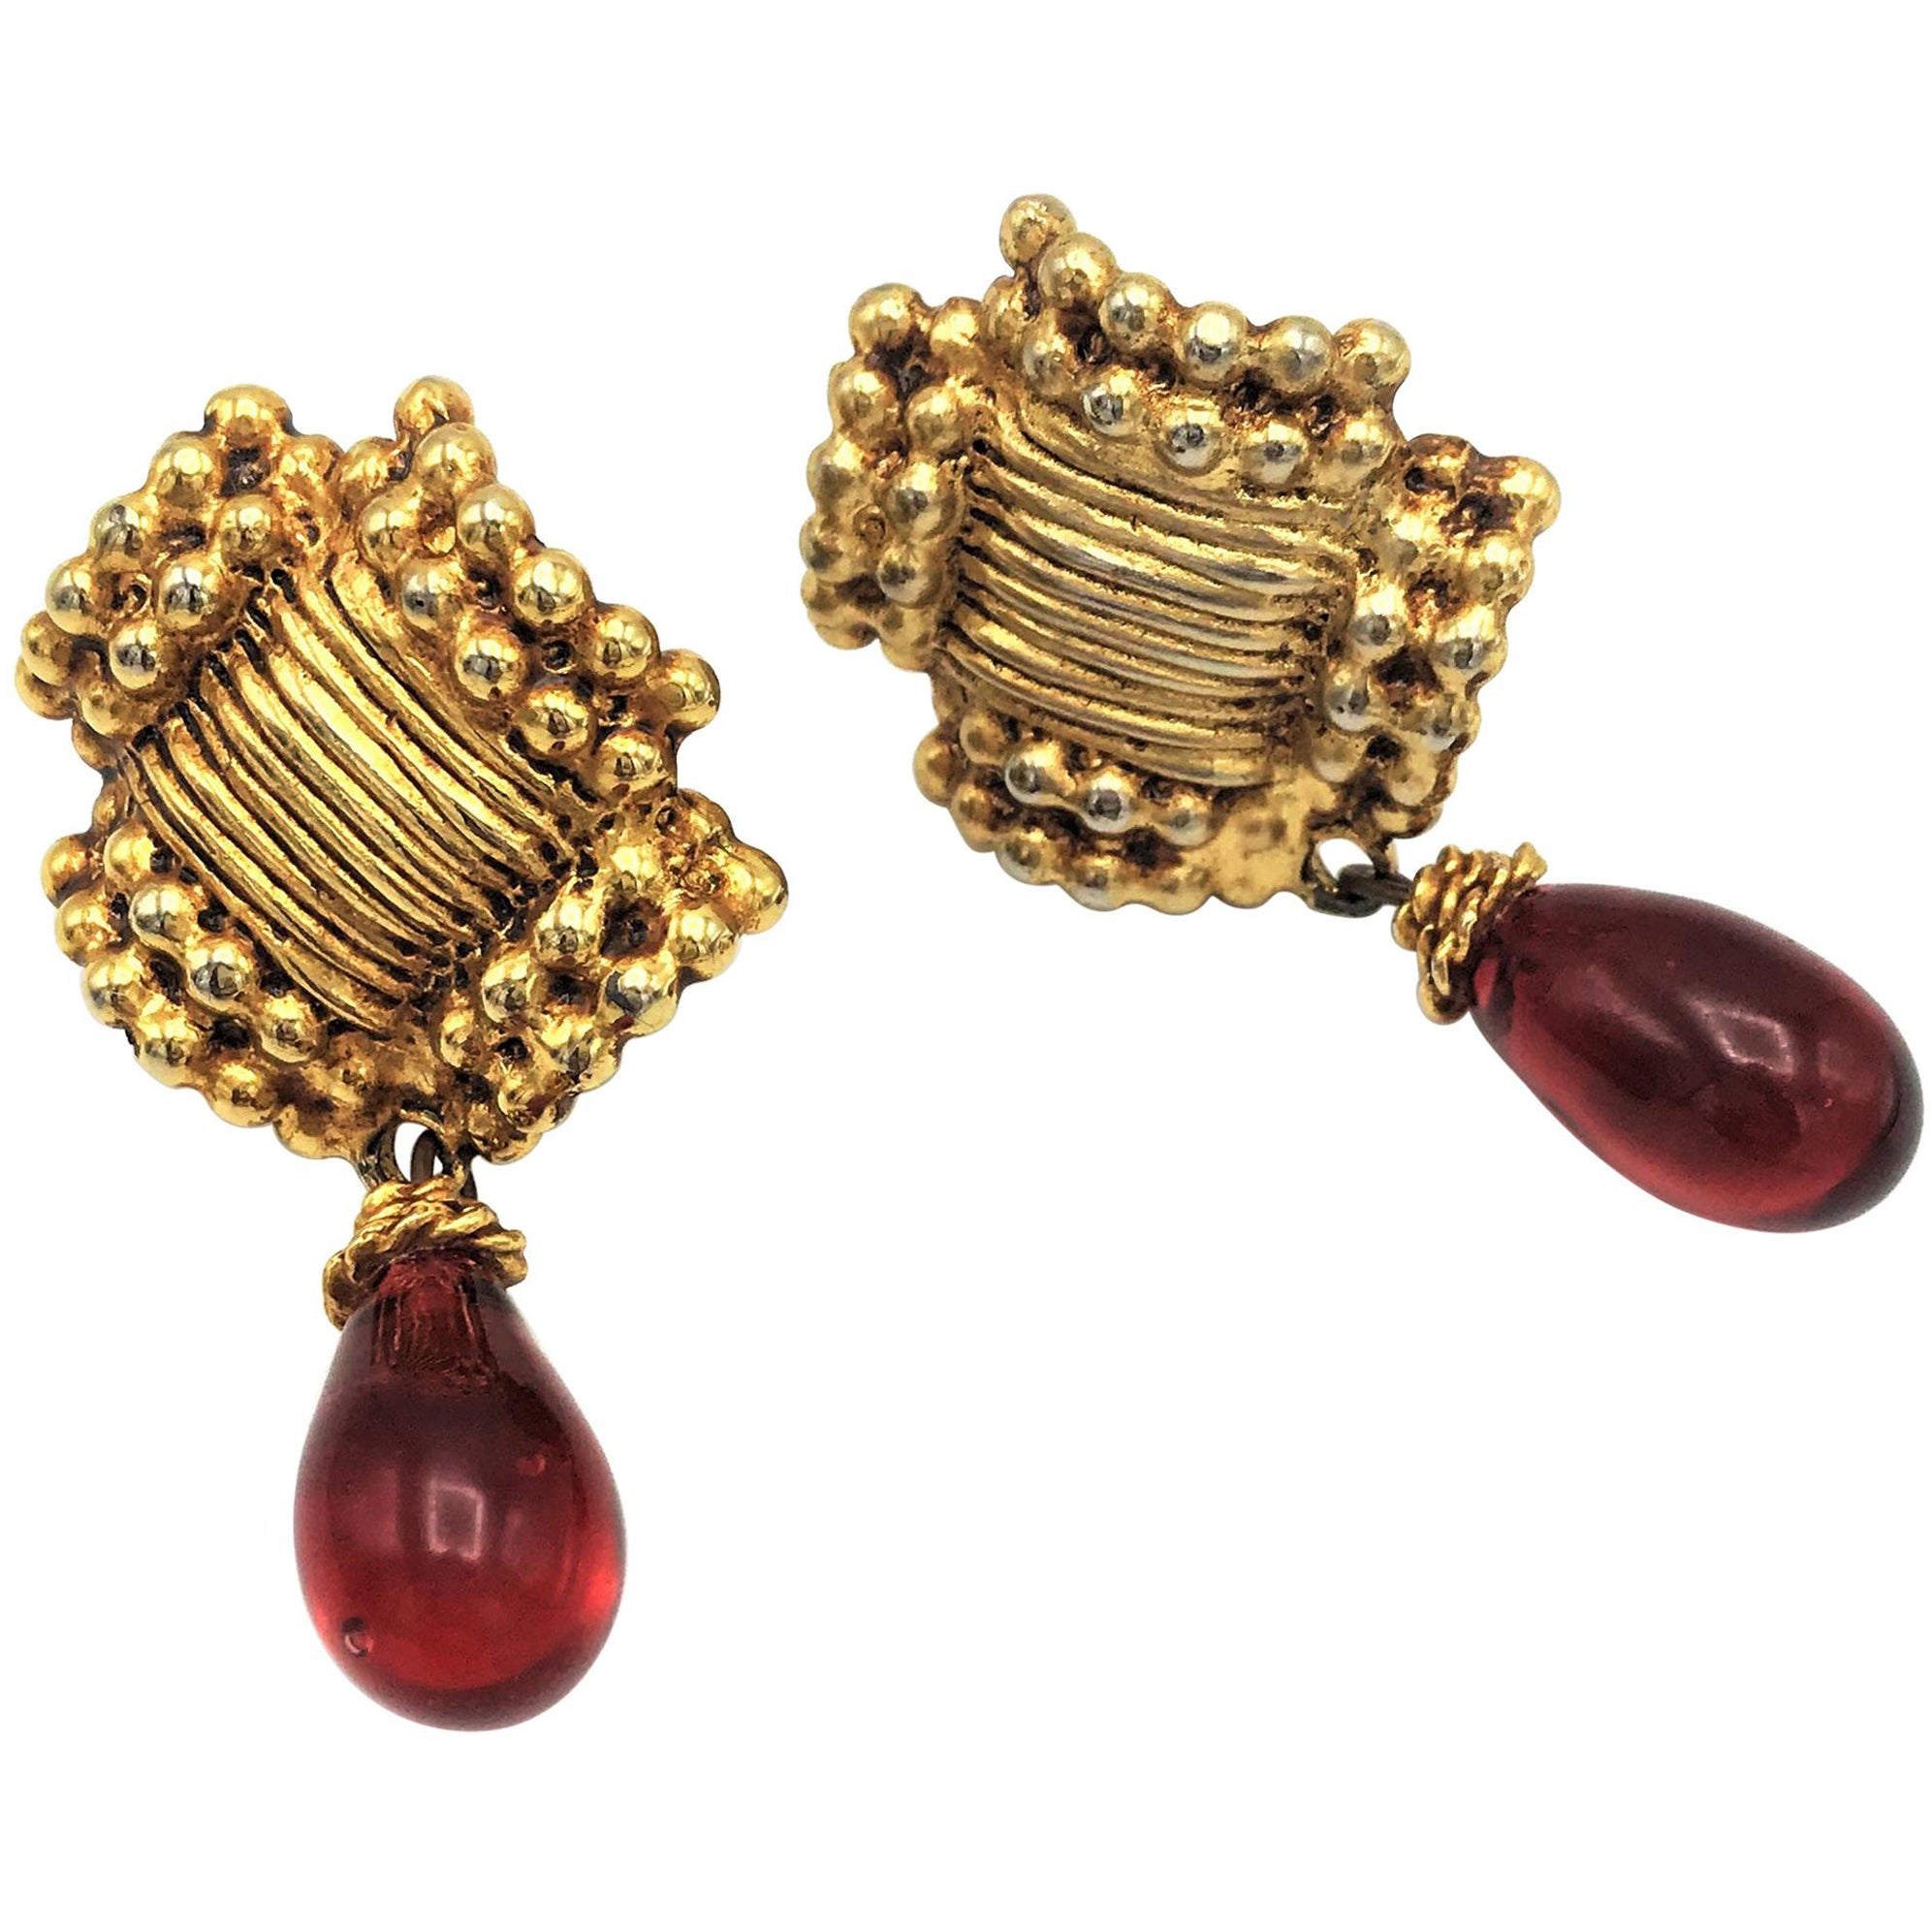  Vintage clip-on earrings from ANTIGONA PARIS 1970s, gold-plated with red drops For Sale